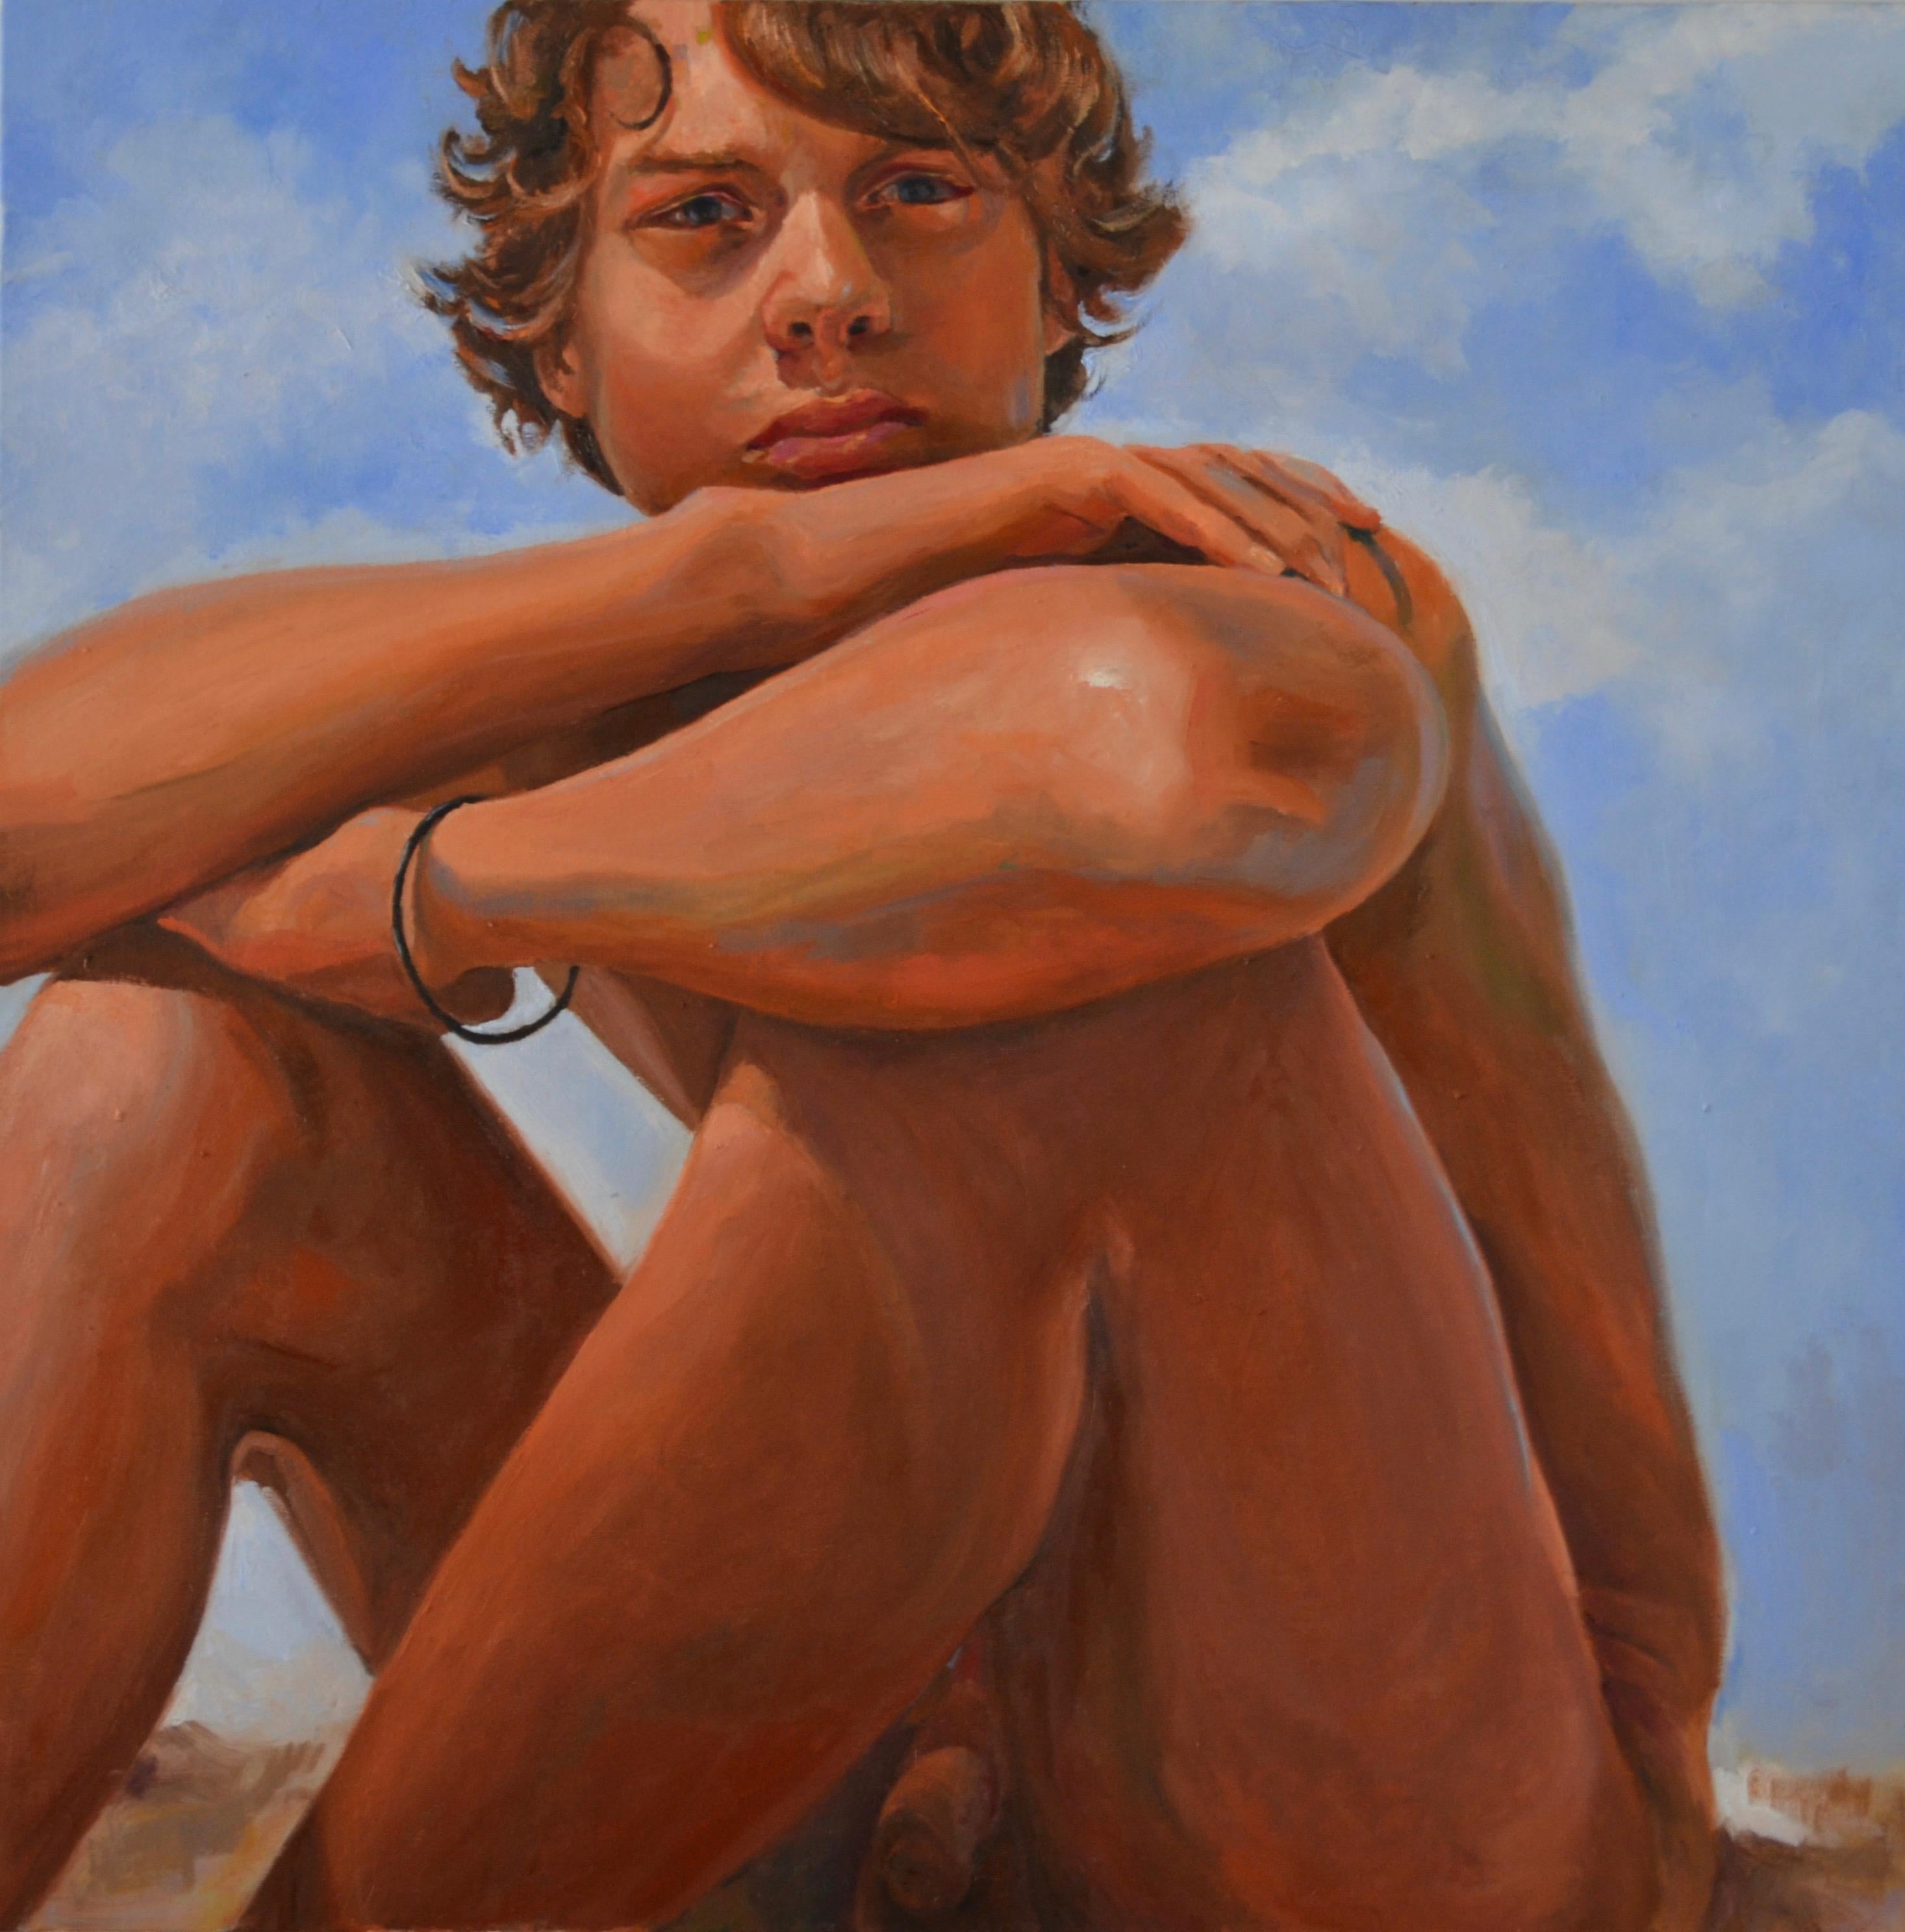 David van der Linden Figurative Painting - Boys keep Swinging I- 21st Century Dutch Contemporary Nude Painting of a Boy